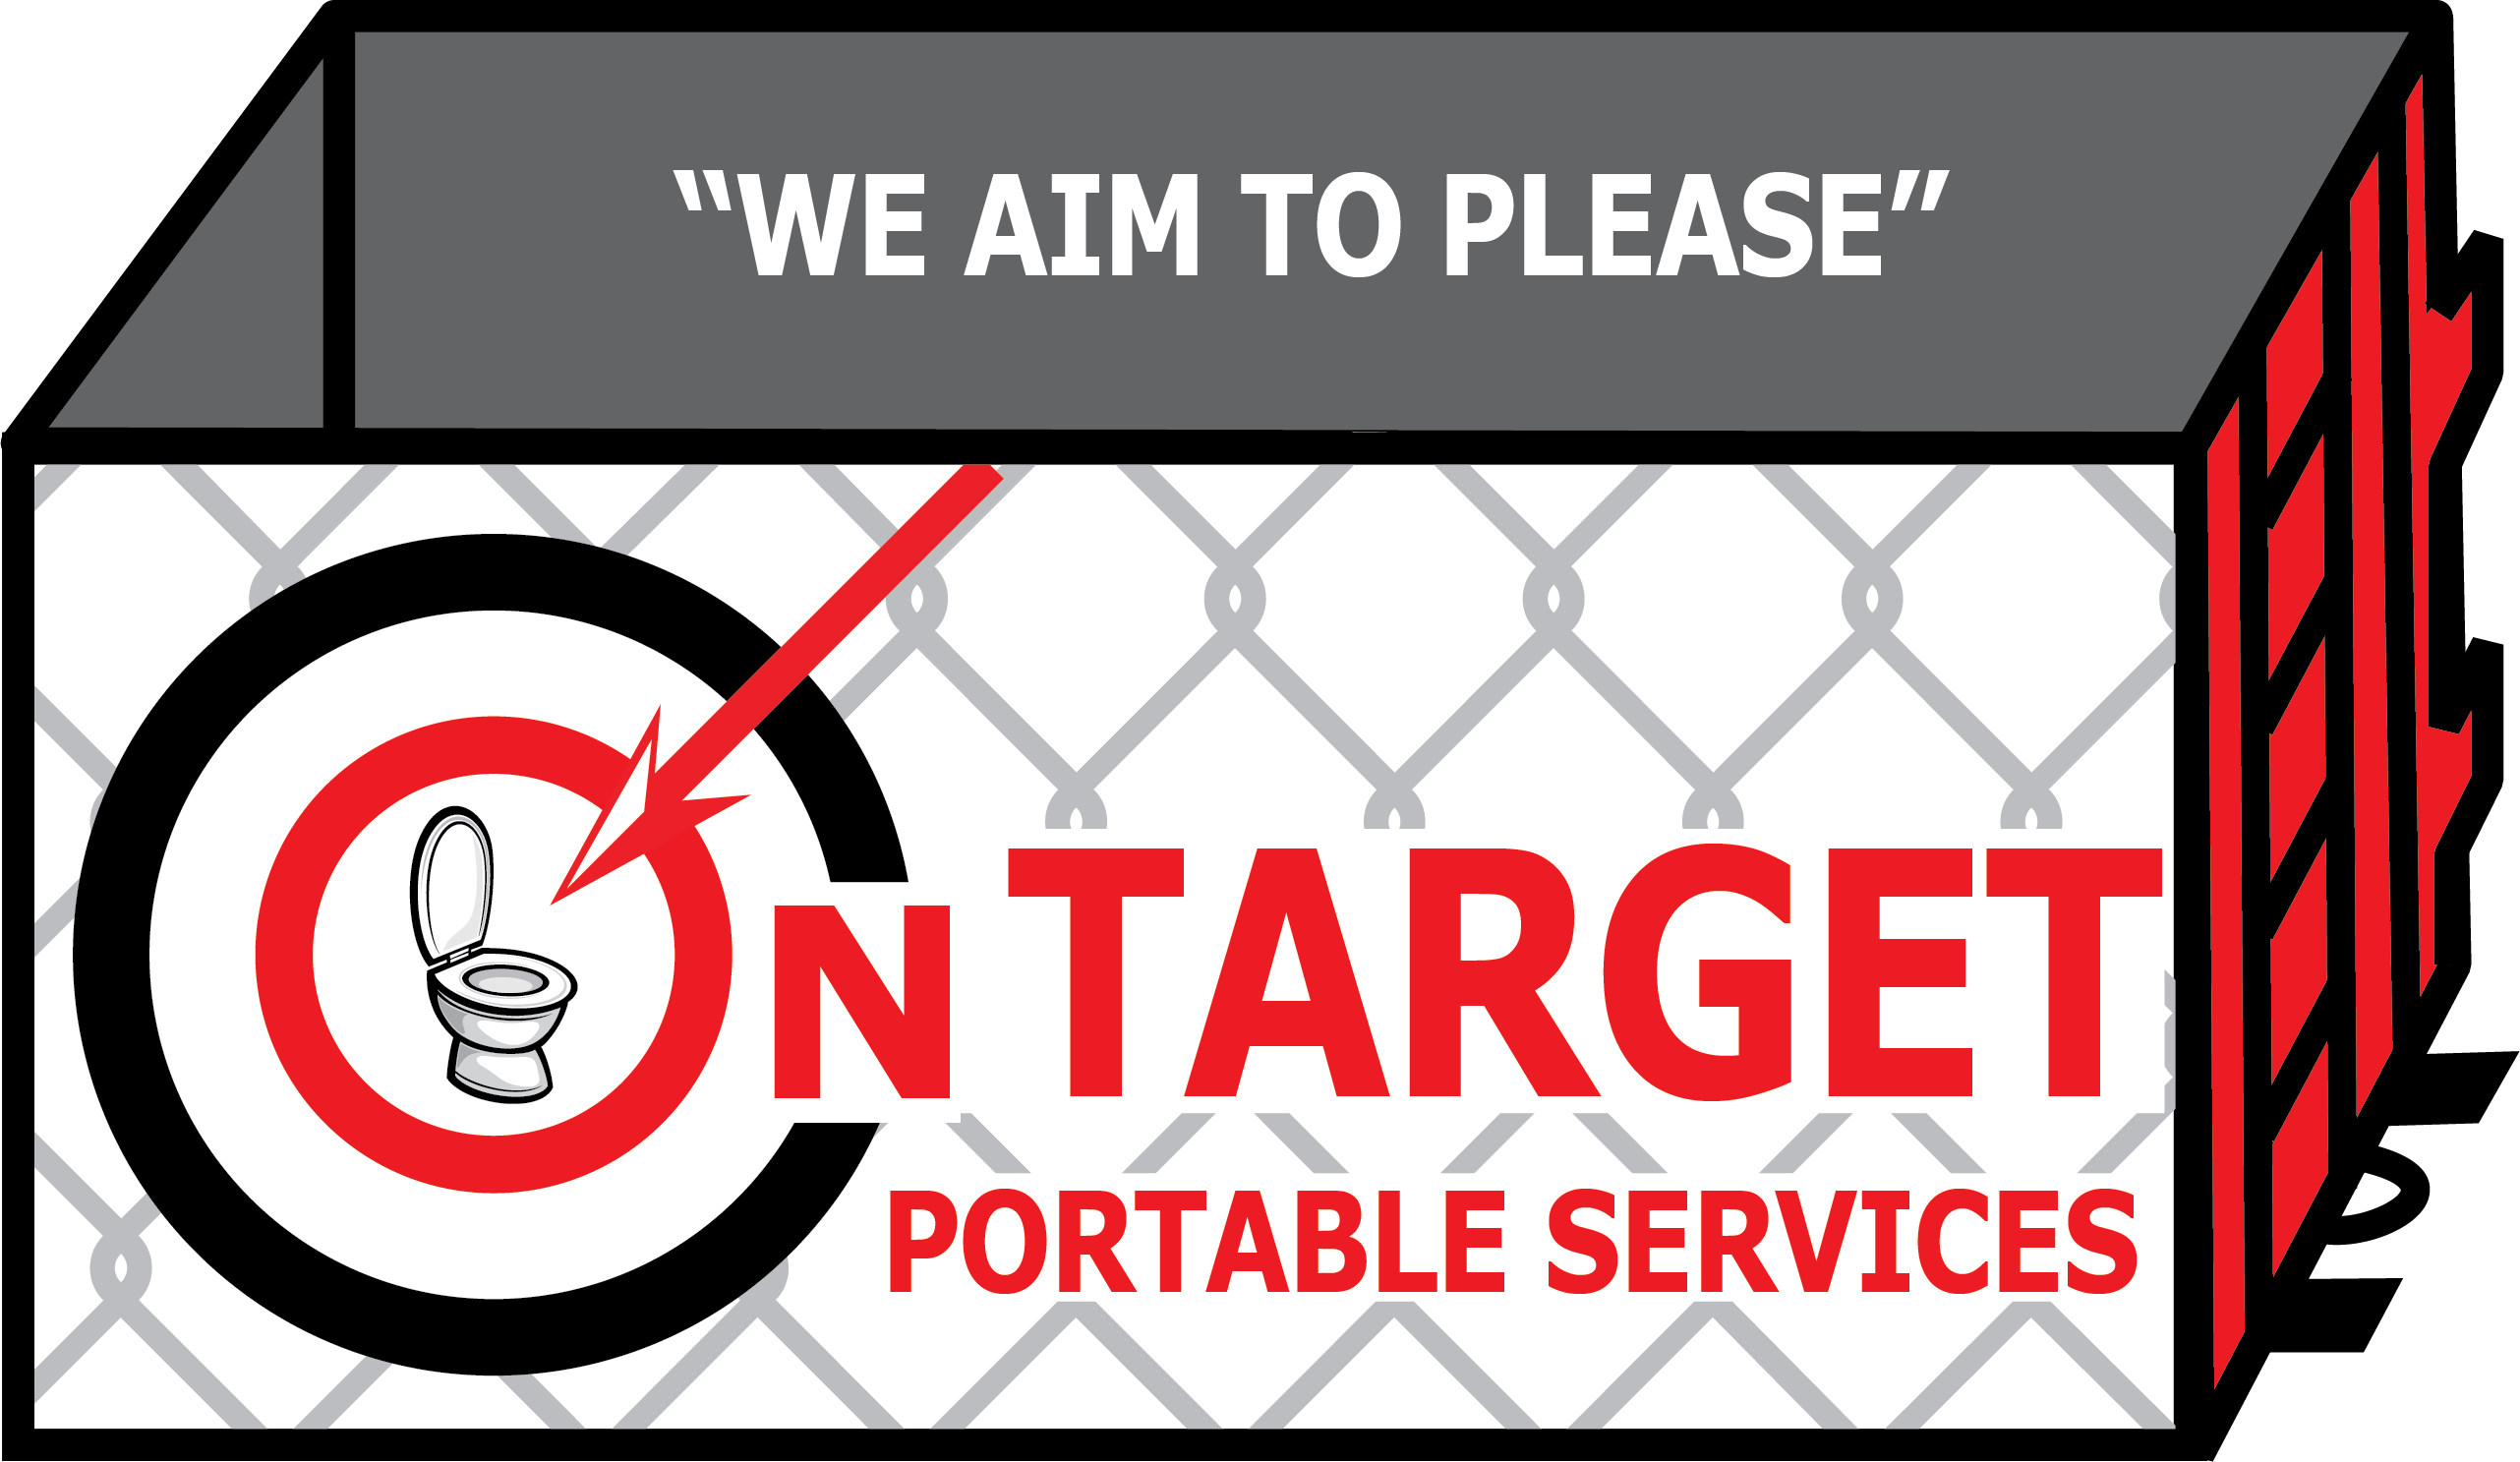 On Target Portable Services | Portable Toilets, Roll Off Containers, Construction Fencing